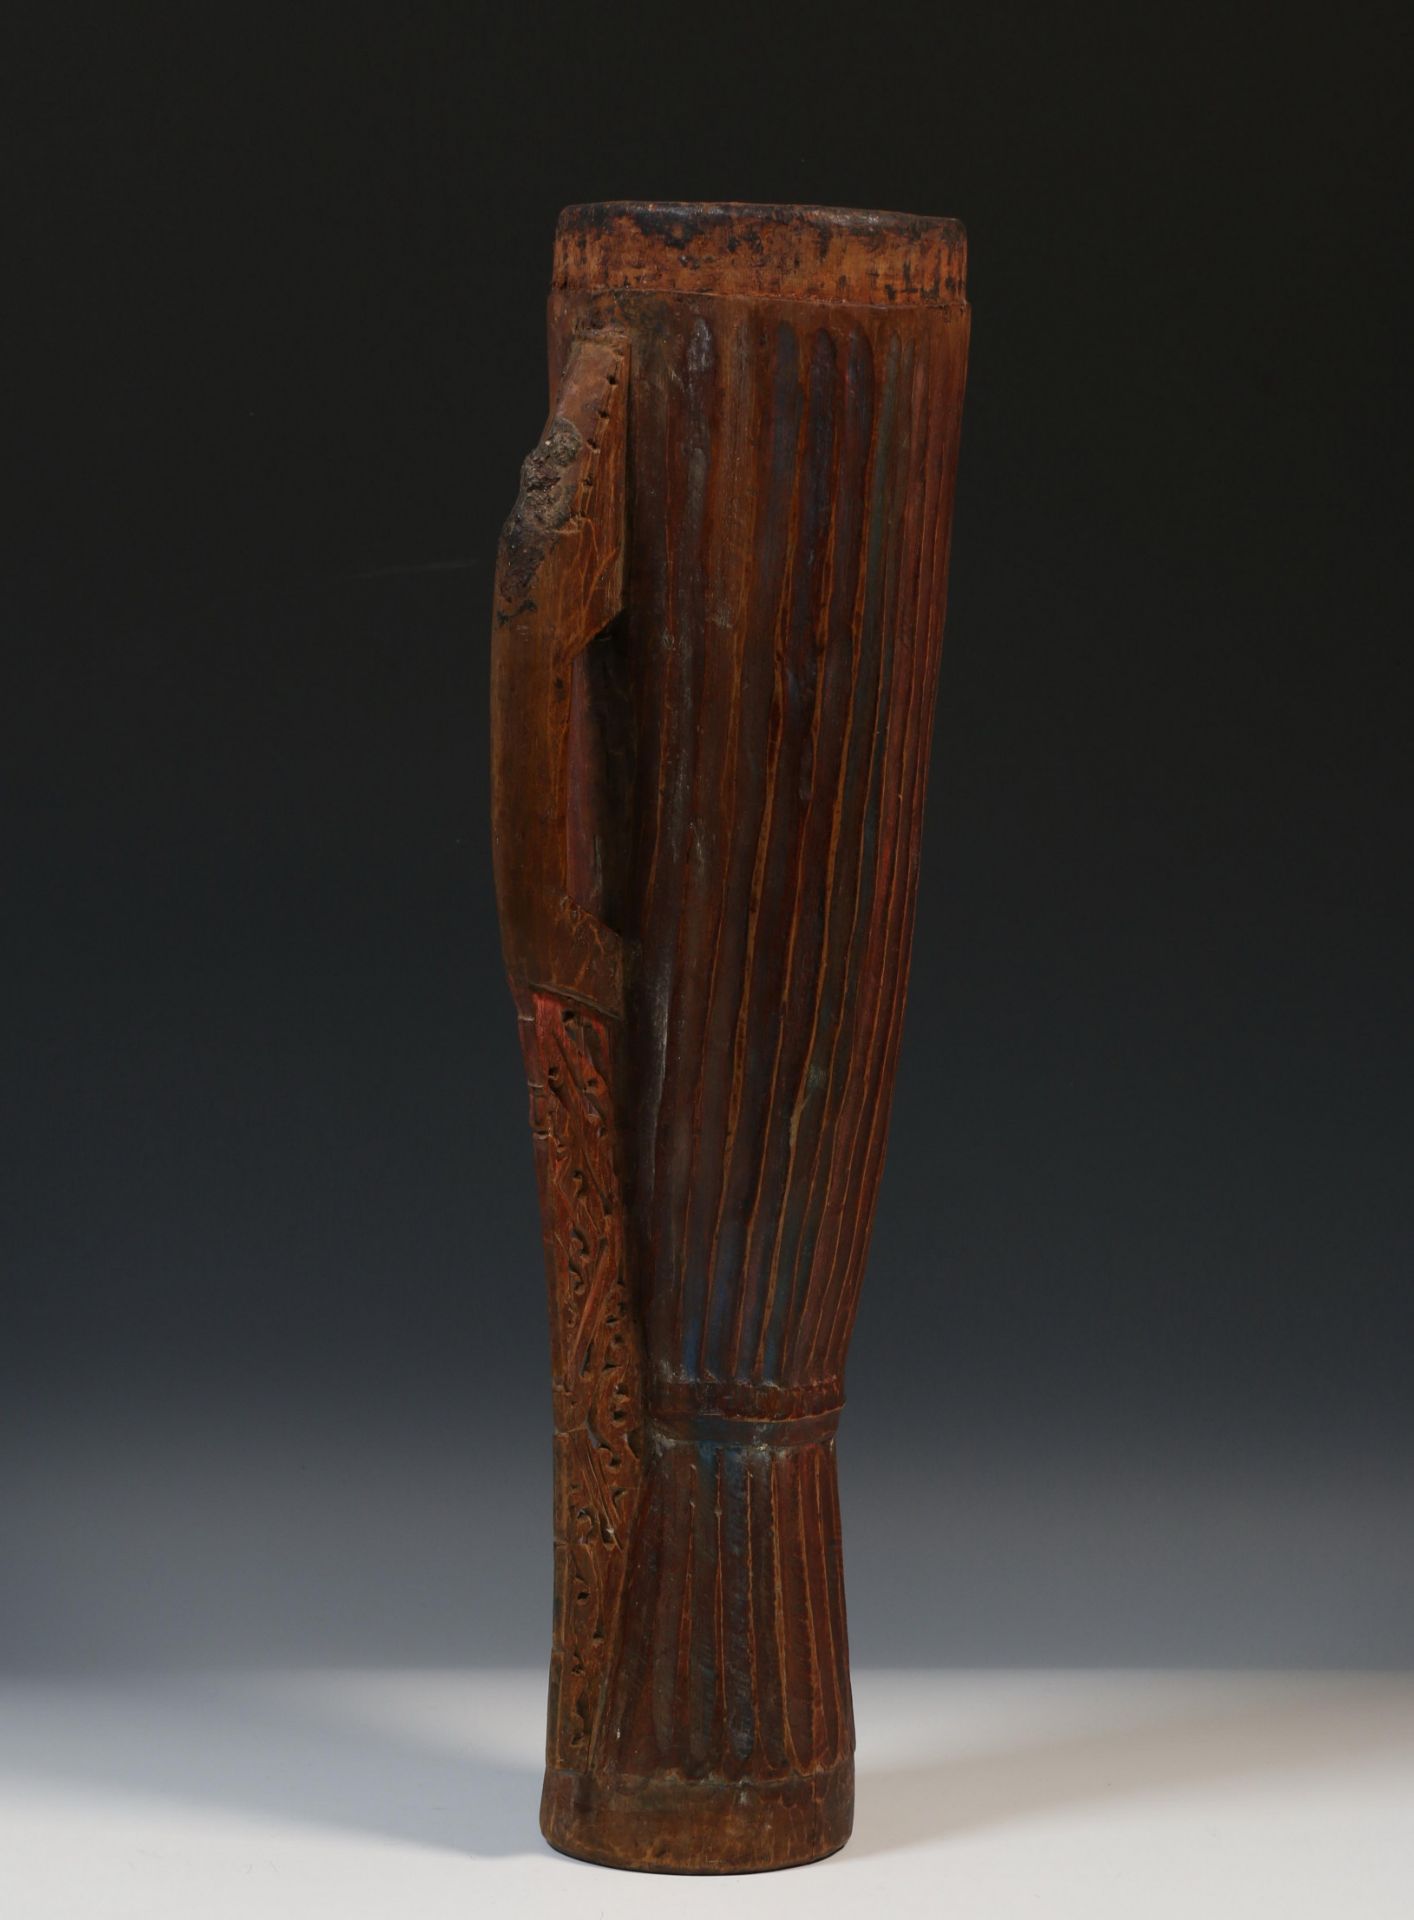 Papua, Cenderawasih Bay, drum, fluted, the handle on lower part openworked, tympanum missing